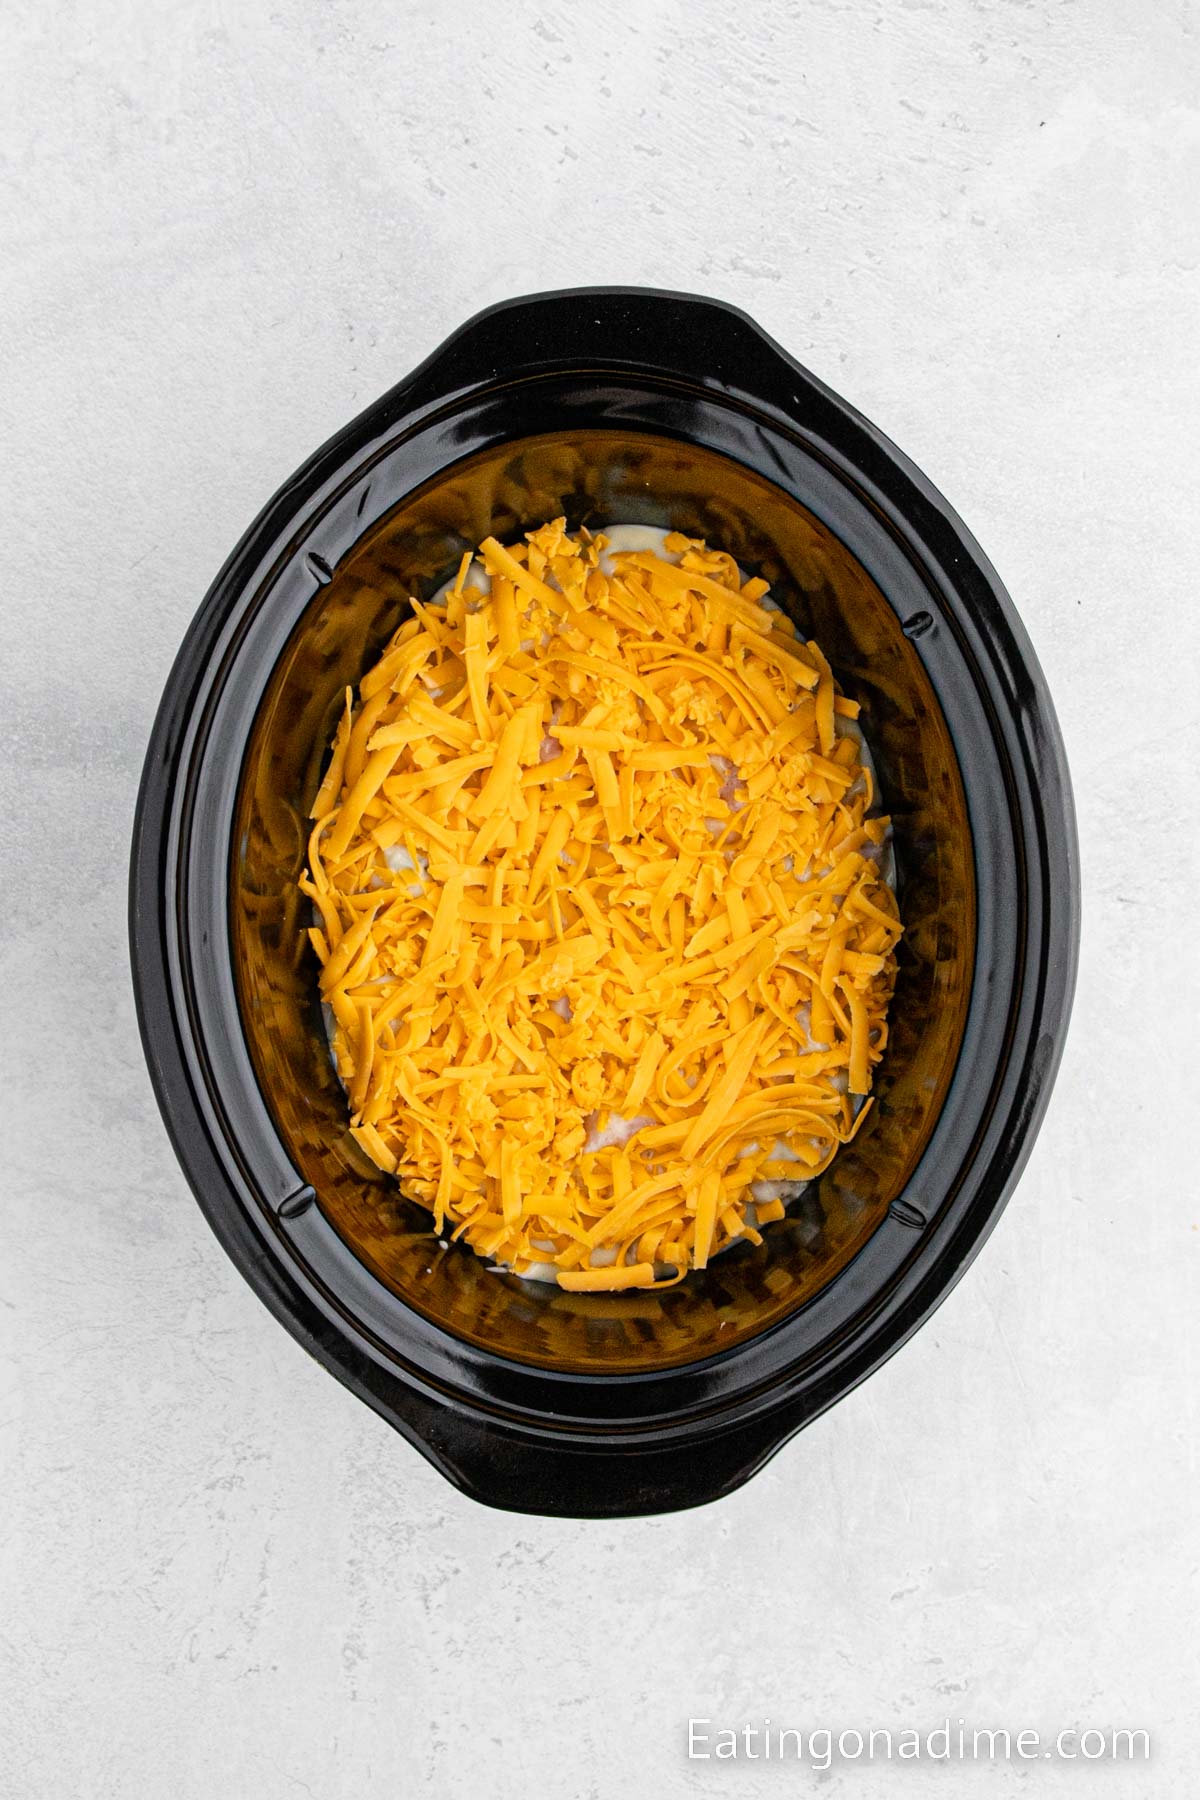 Adding in a layer of shredded cheese in the slow cooker